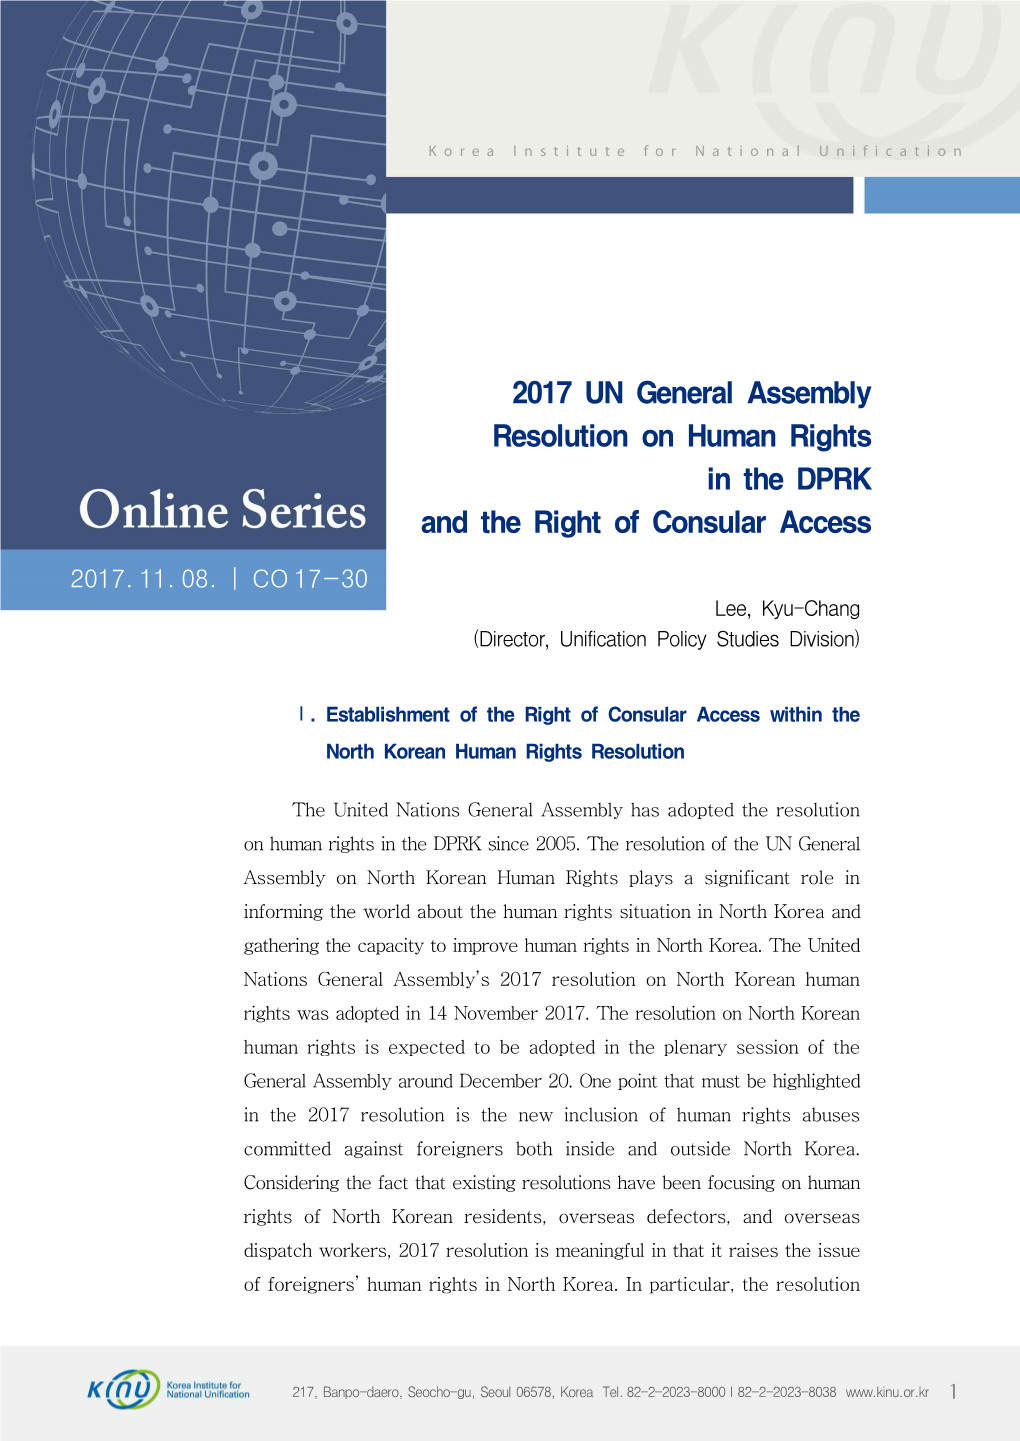 2017 UN General Assembly Resolution on Human Rights in the DPRK and the Right of Consular Access